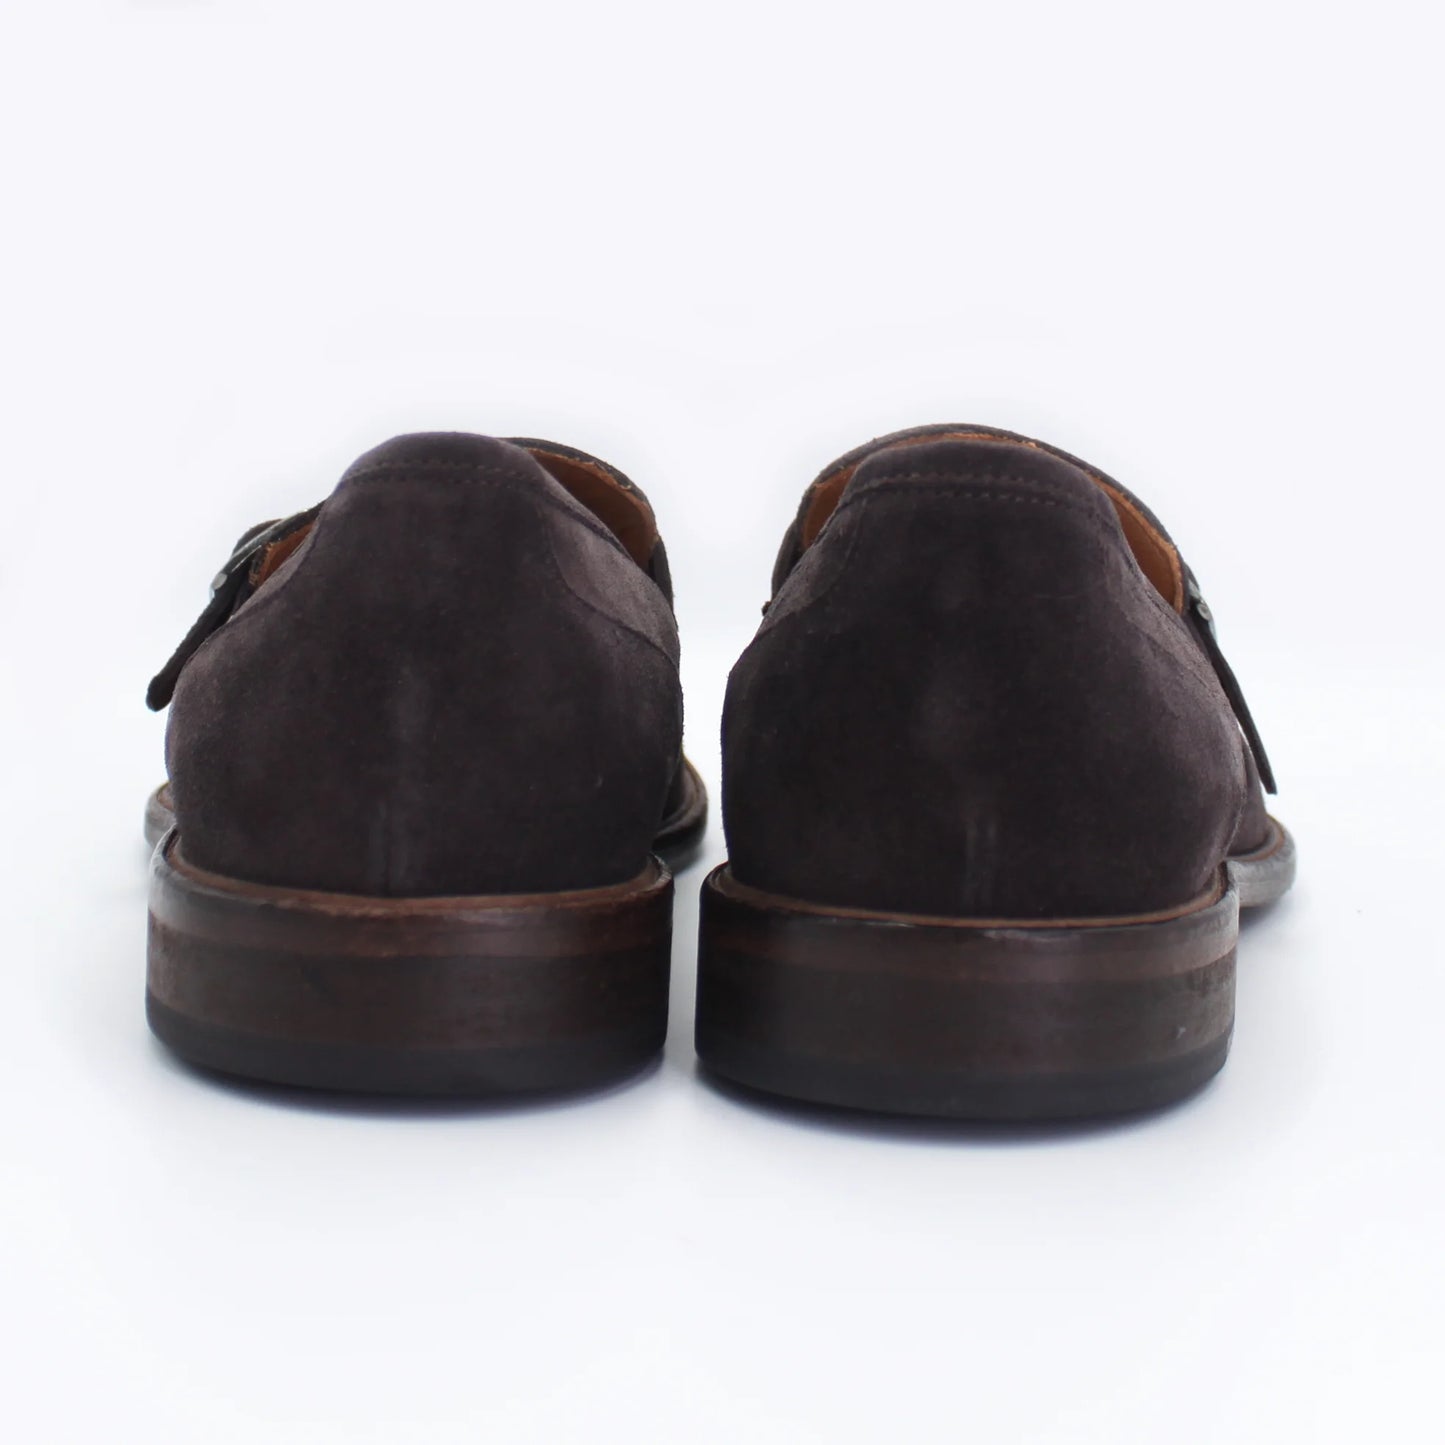 Men's Genuine Suede Leather Moccasin with Buckle in Testa di Moro  (AC337)